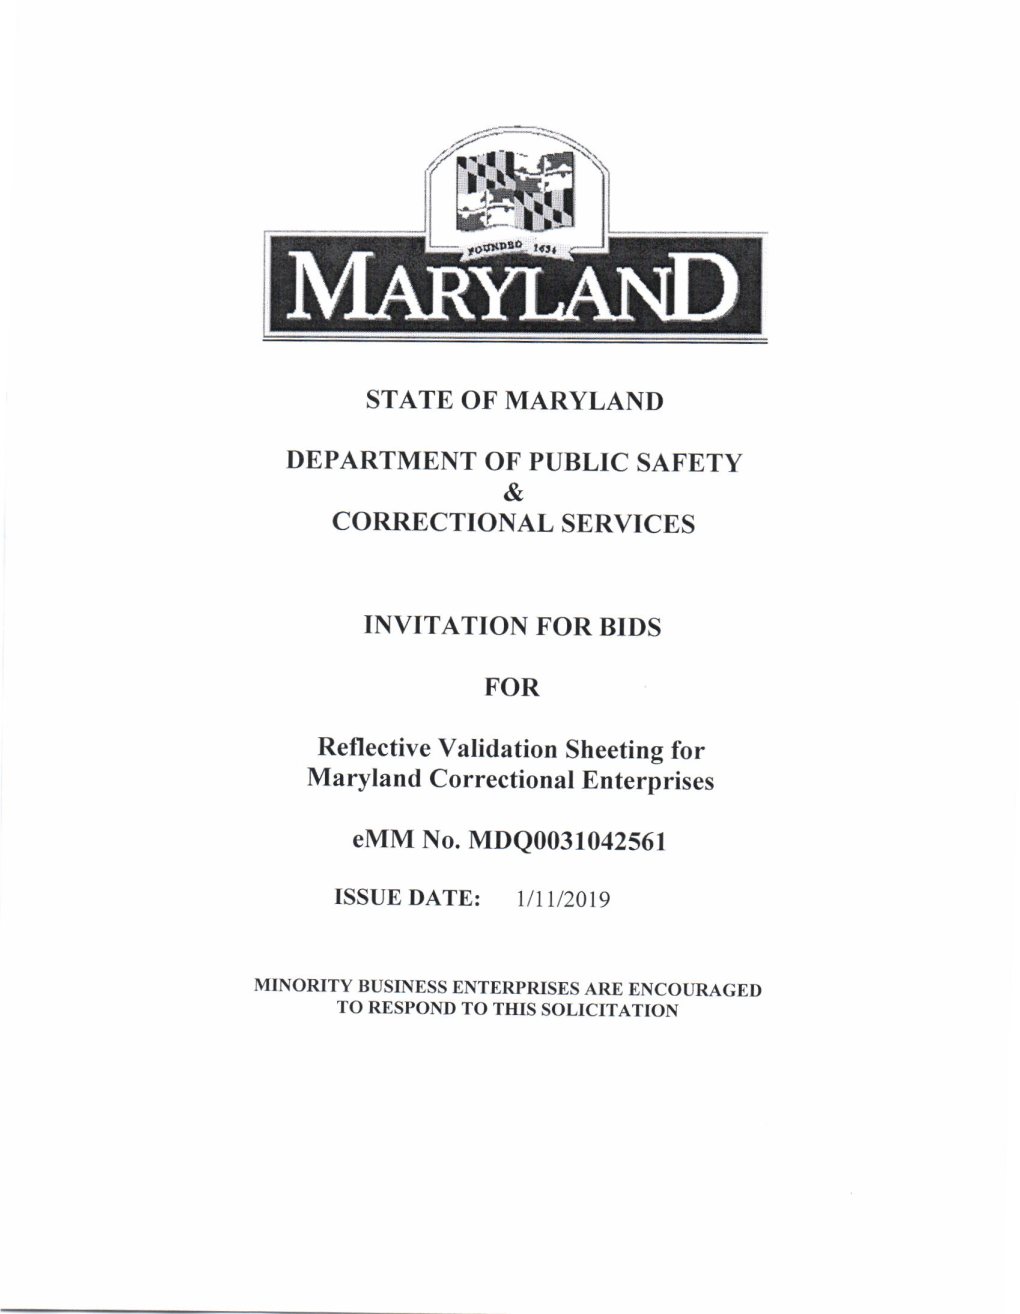 State of Maryland Invitation for Bids